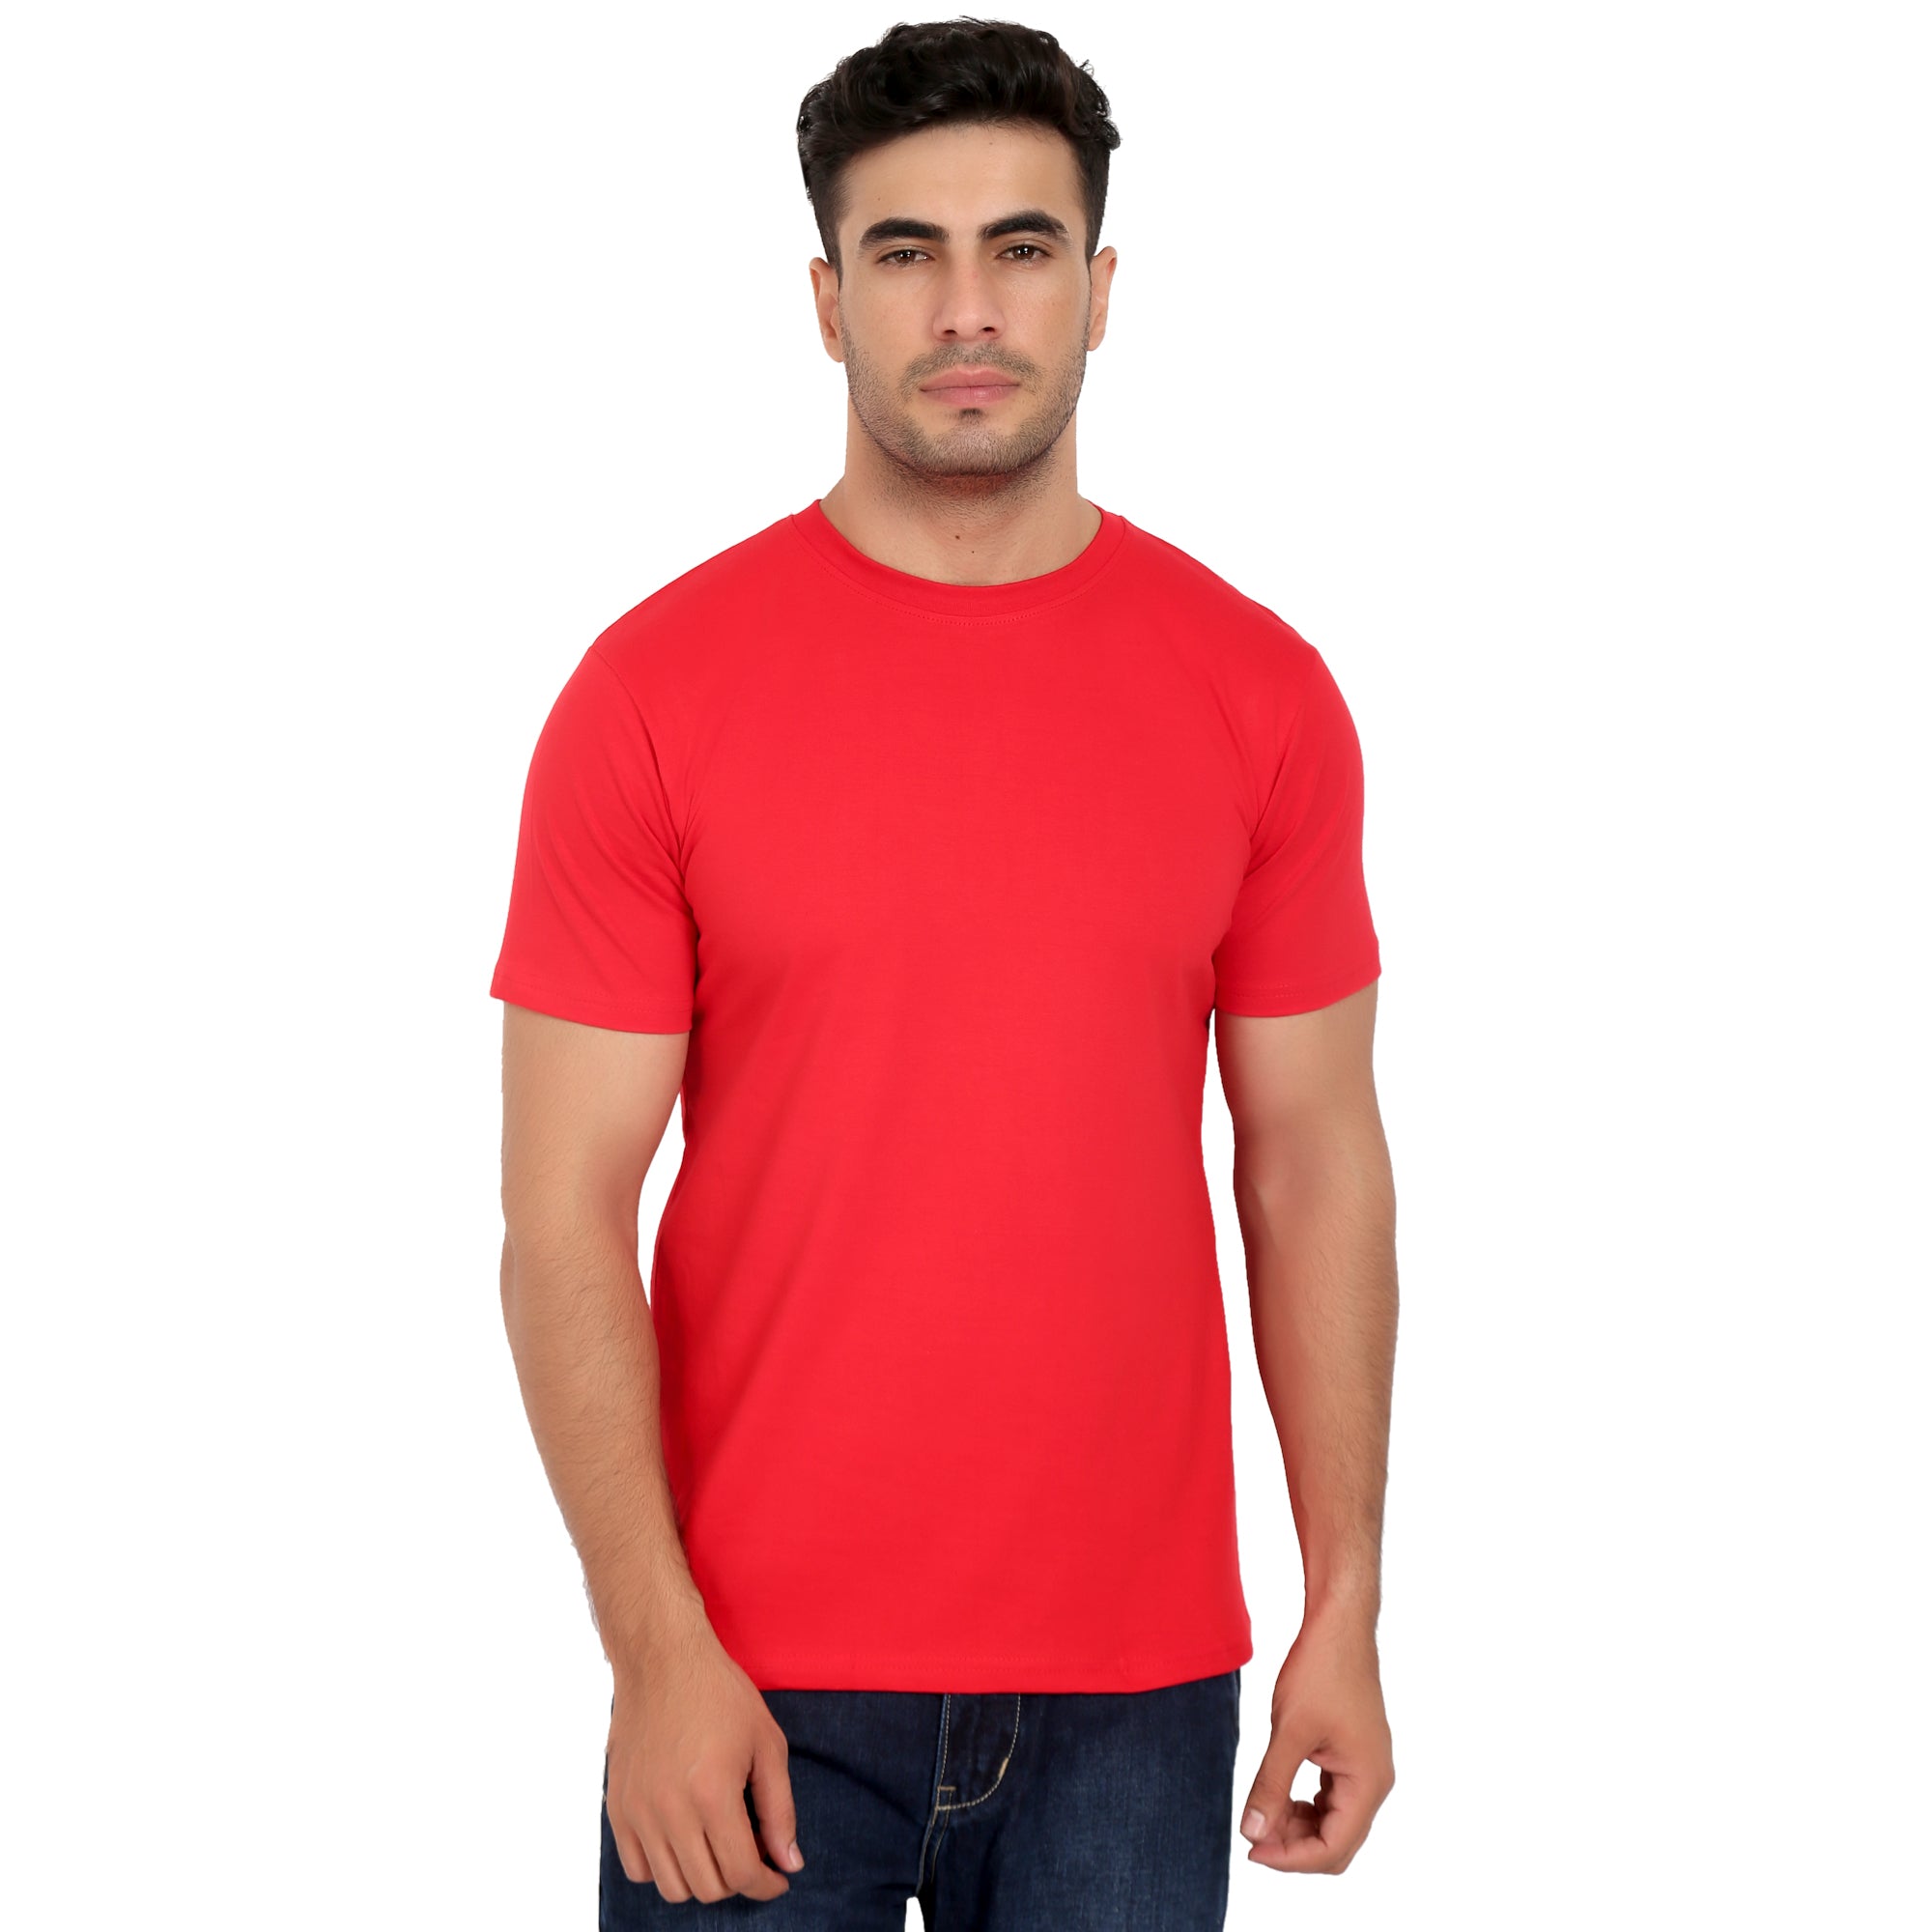 Combo Offer - Men Crew Neck Cotton T-Shirts - Half Sleeves - 3 Colors - Black, Red & White